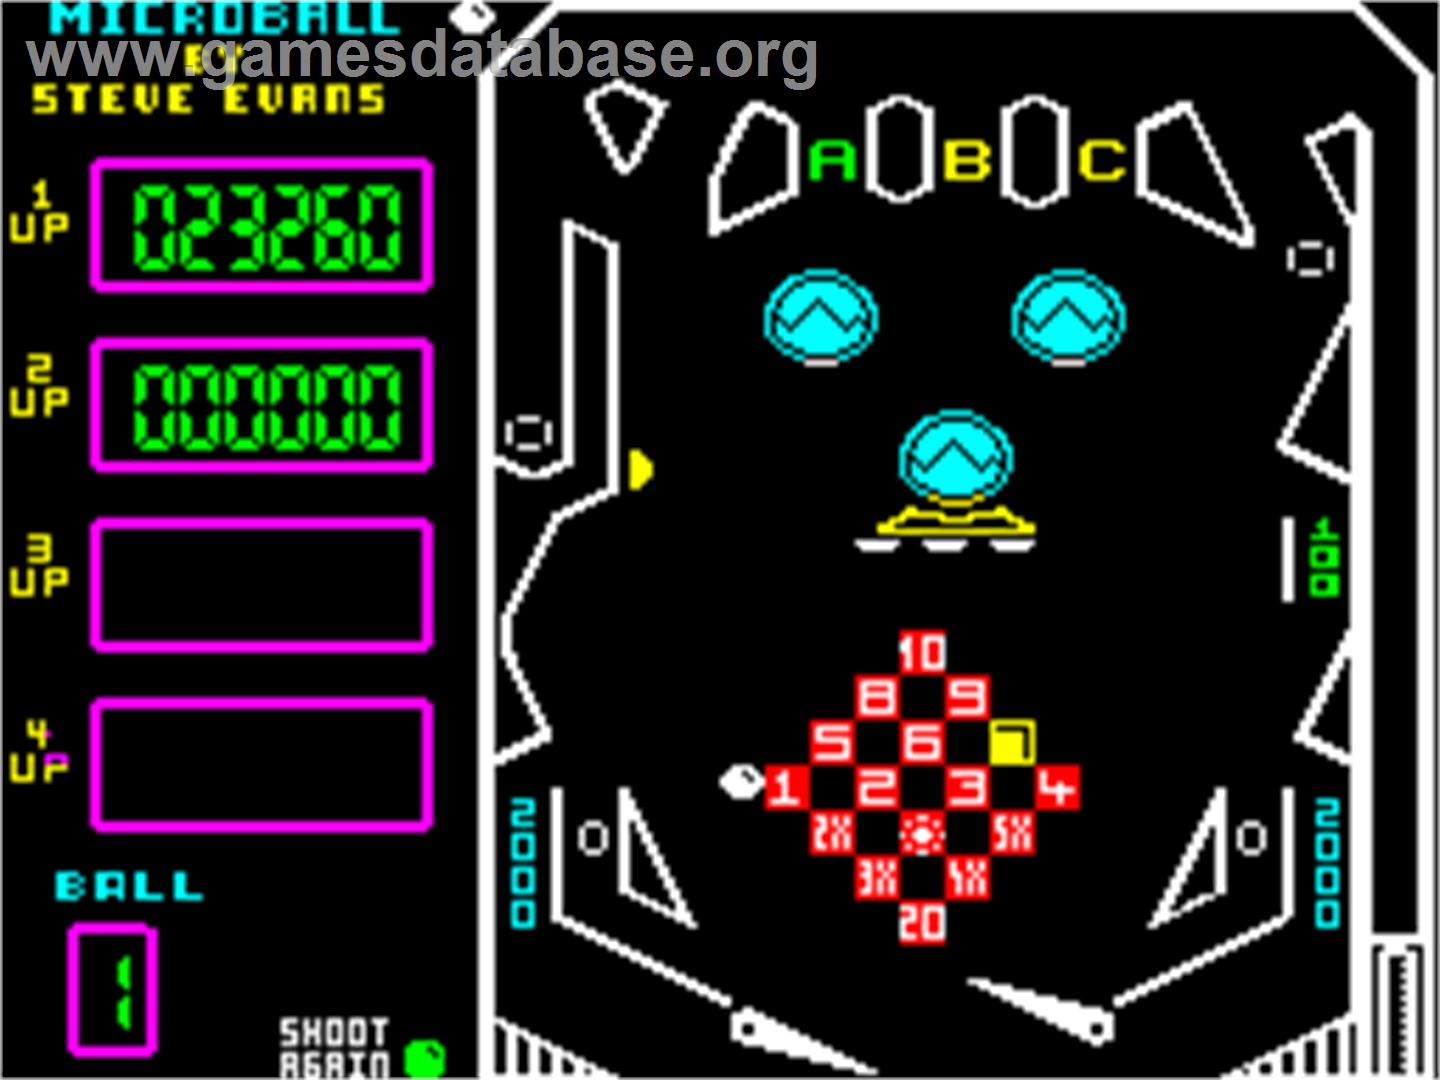 Microball - Sinclair ZX Spectrum - Artwork - In Game